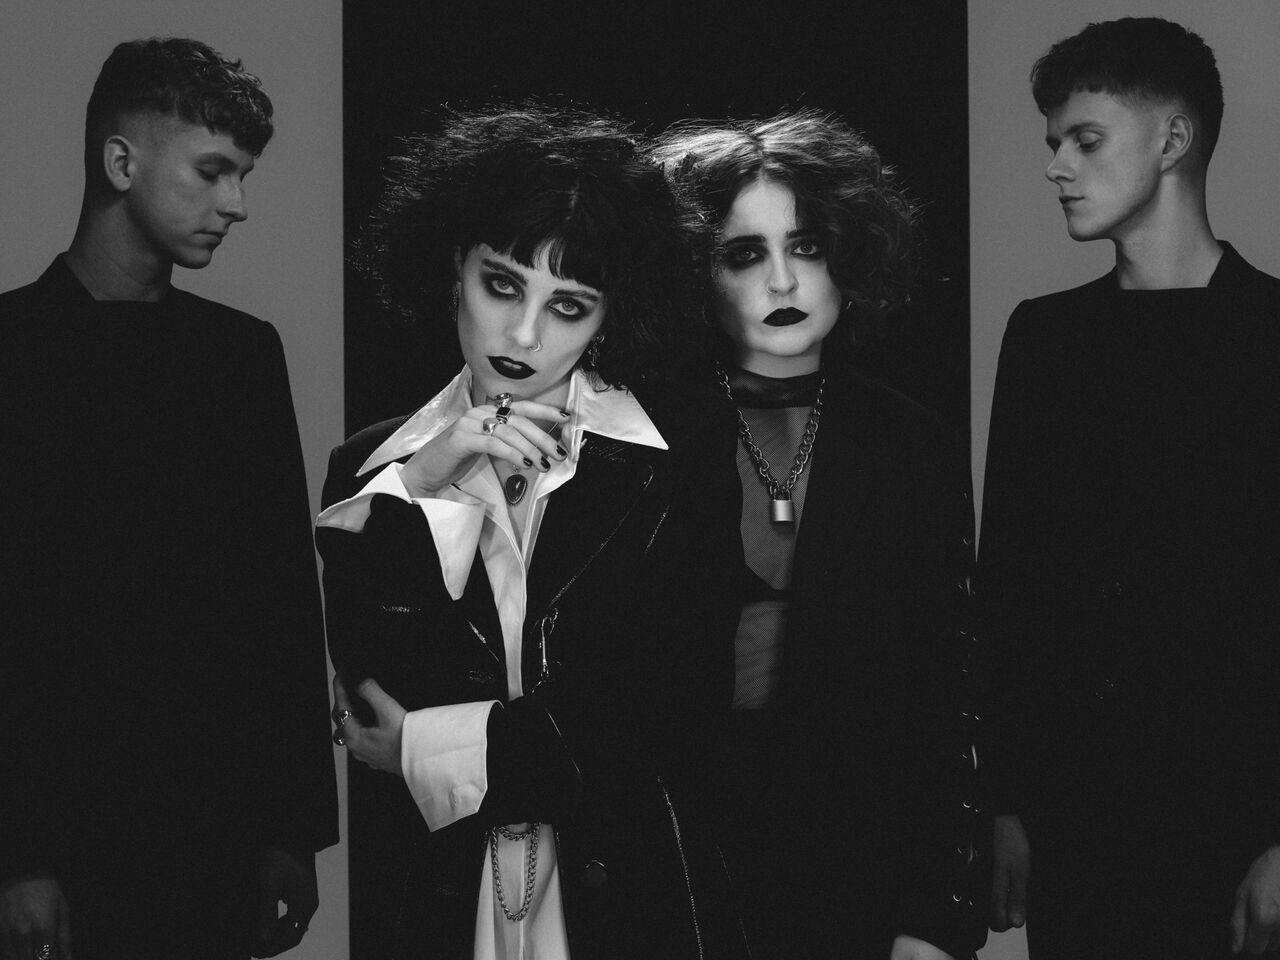 Pale Waves unveil atmospheric new music video for “Eighteen”